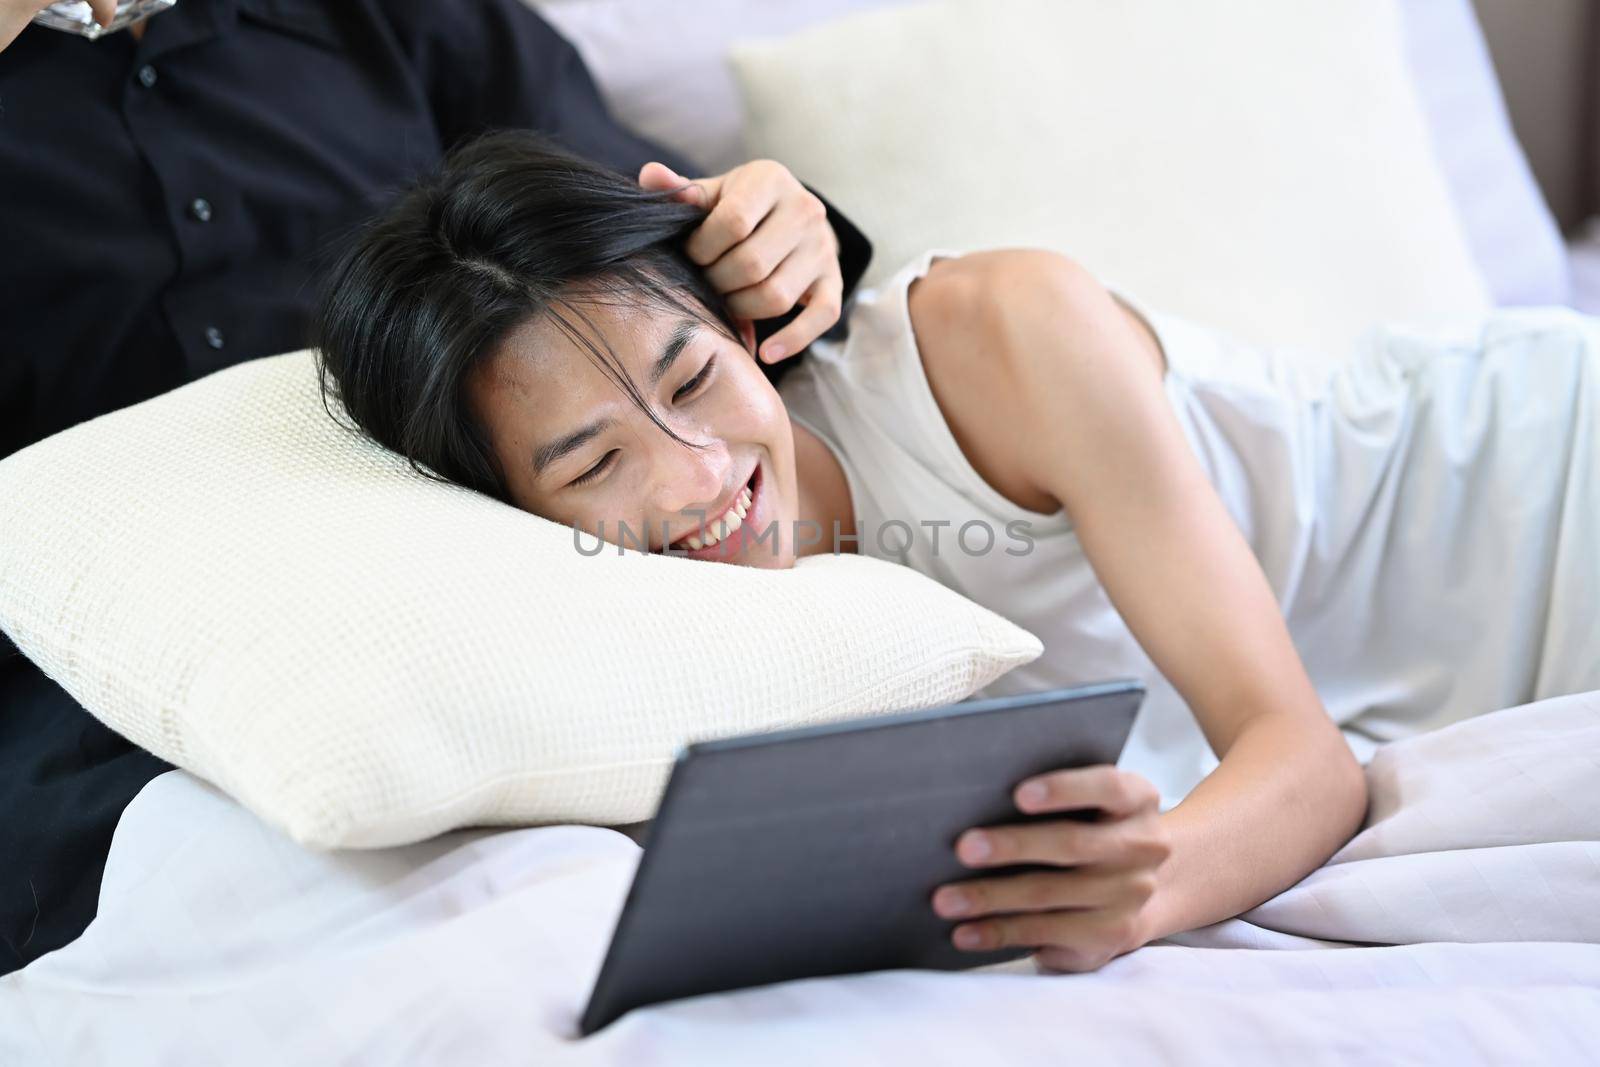 Happy homosexual couple using digital tablet on bed while spending leisure time together. LGBT, pride, relationships and equality concept by prathanchorruangsak